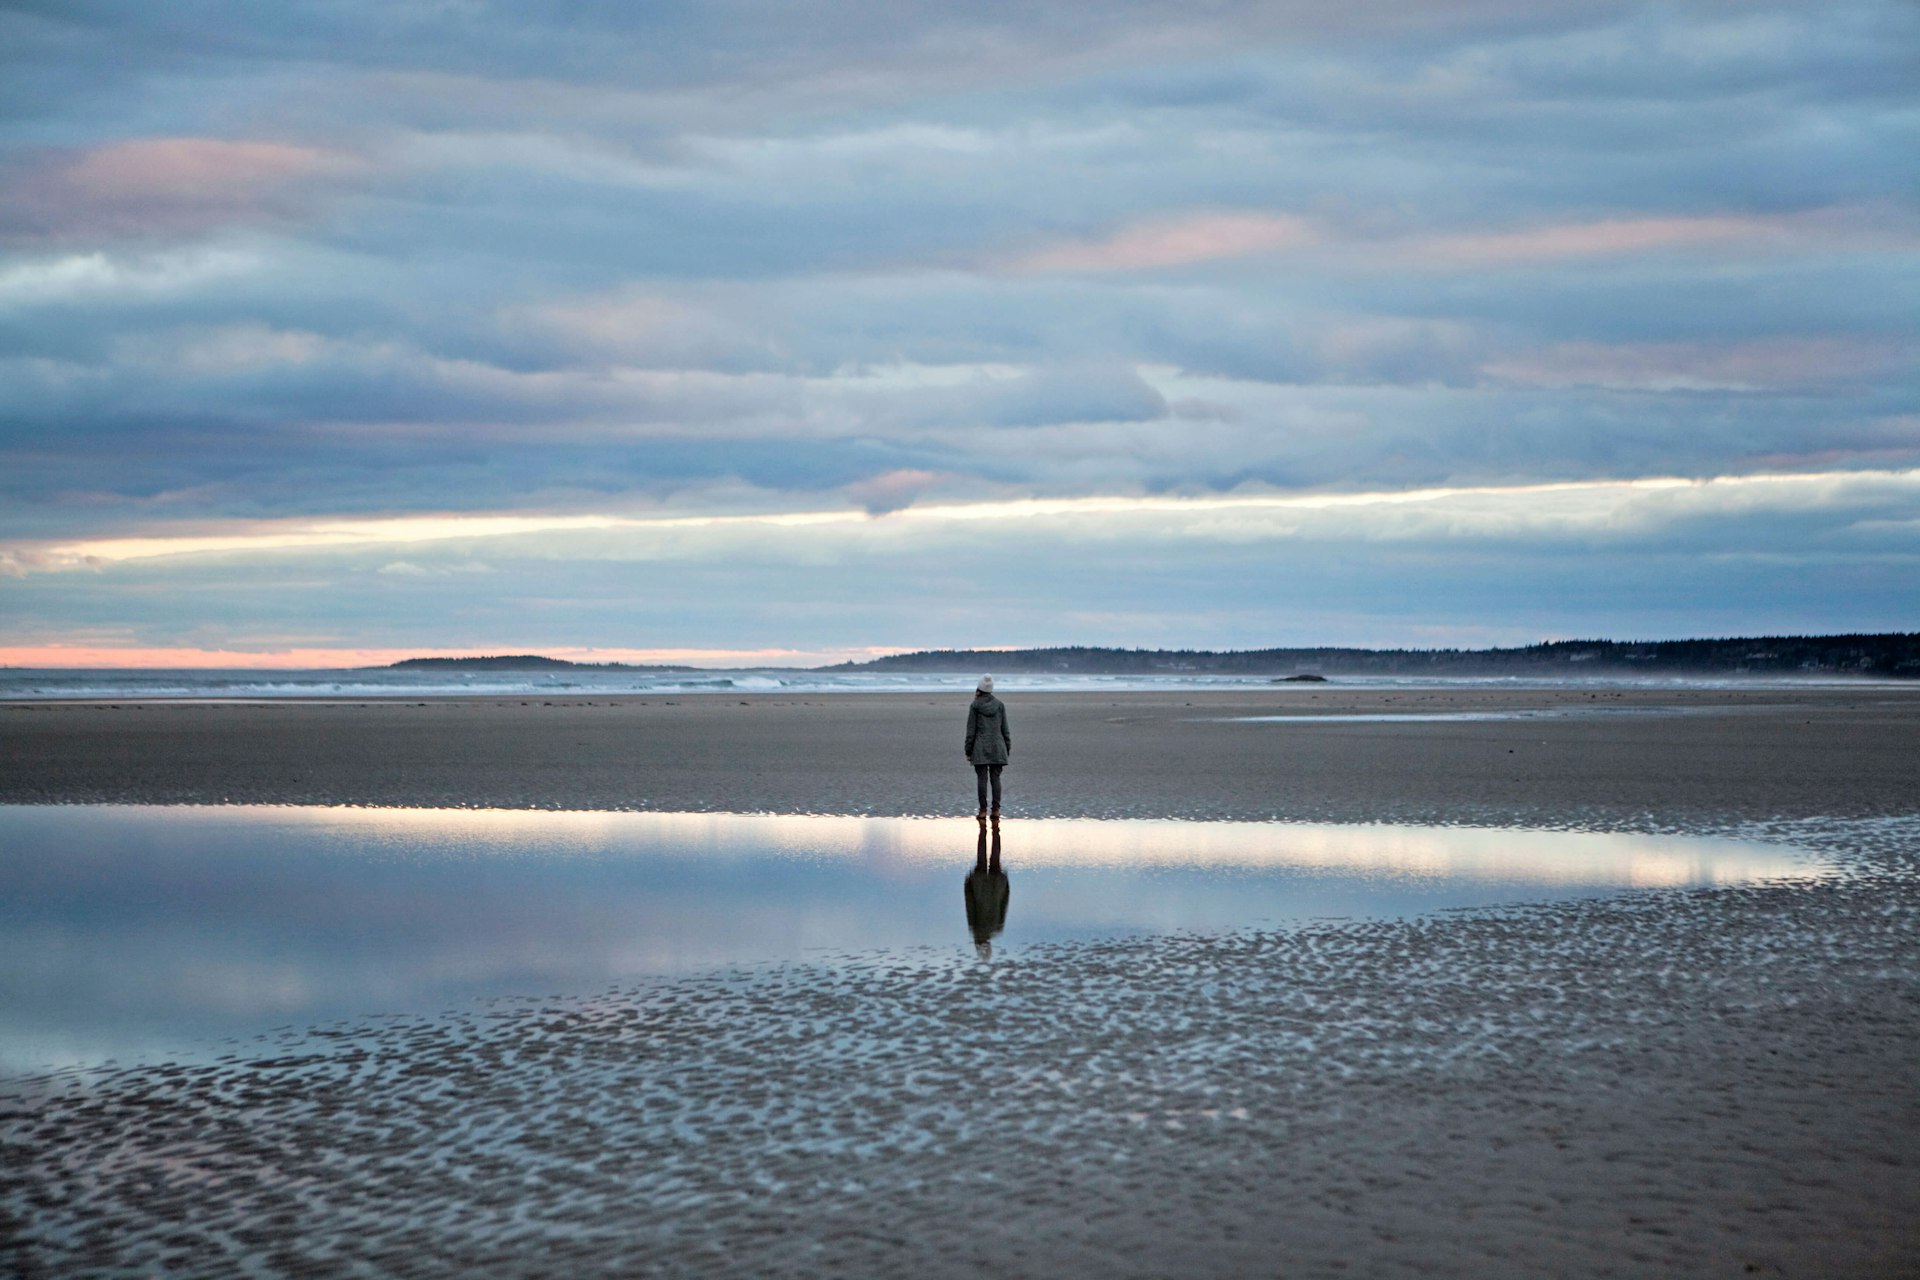 A woman stands reflected in a tidal pool on the beach in Maine